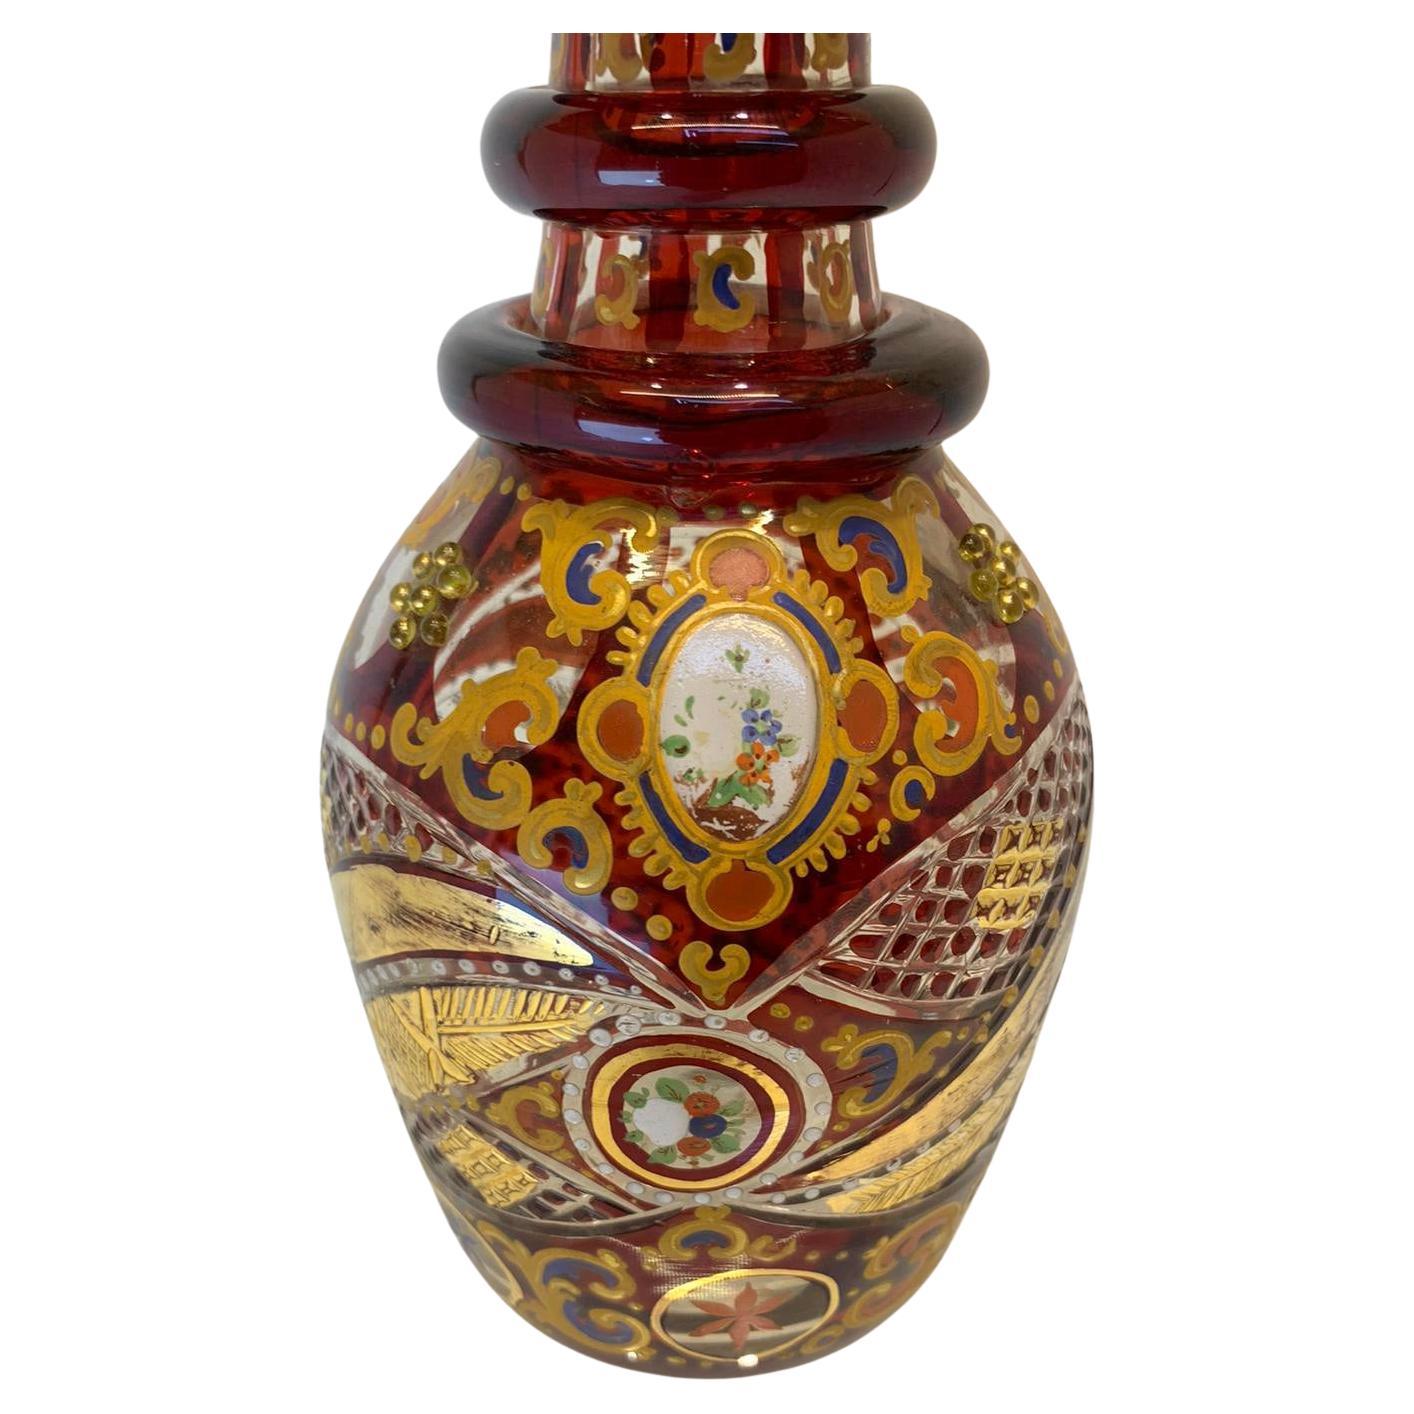 Antique Ruby Enamelled Glass Decanter, Bohemian for Islamic Market, 19th Century For Sale 1